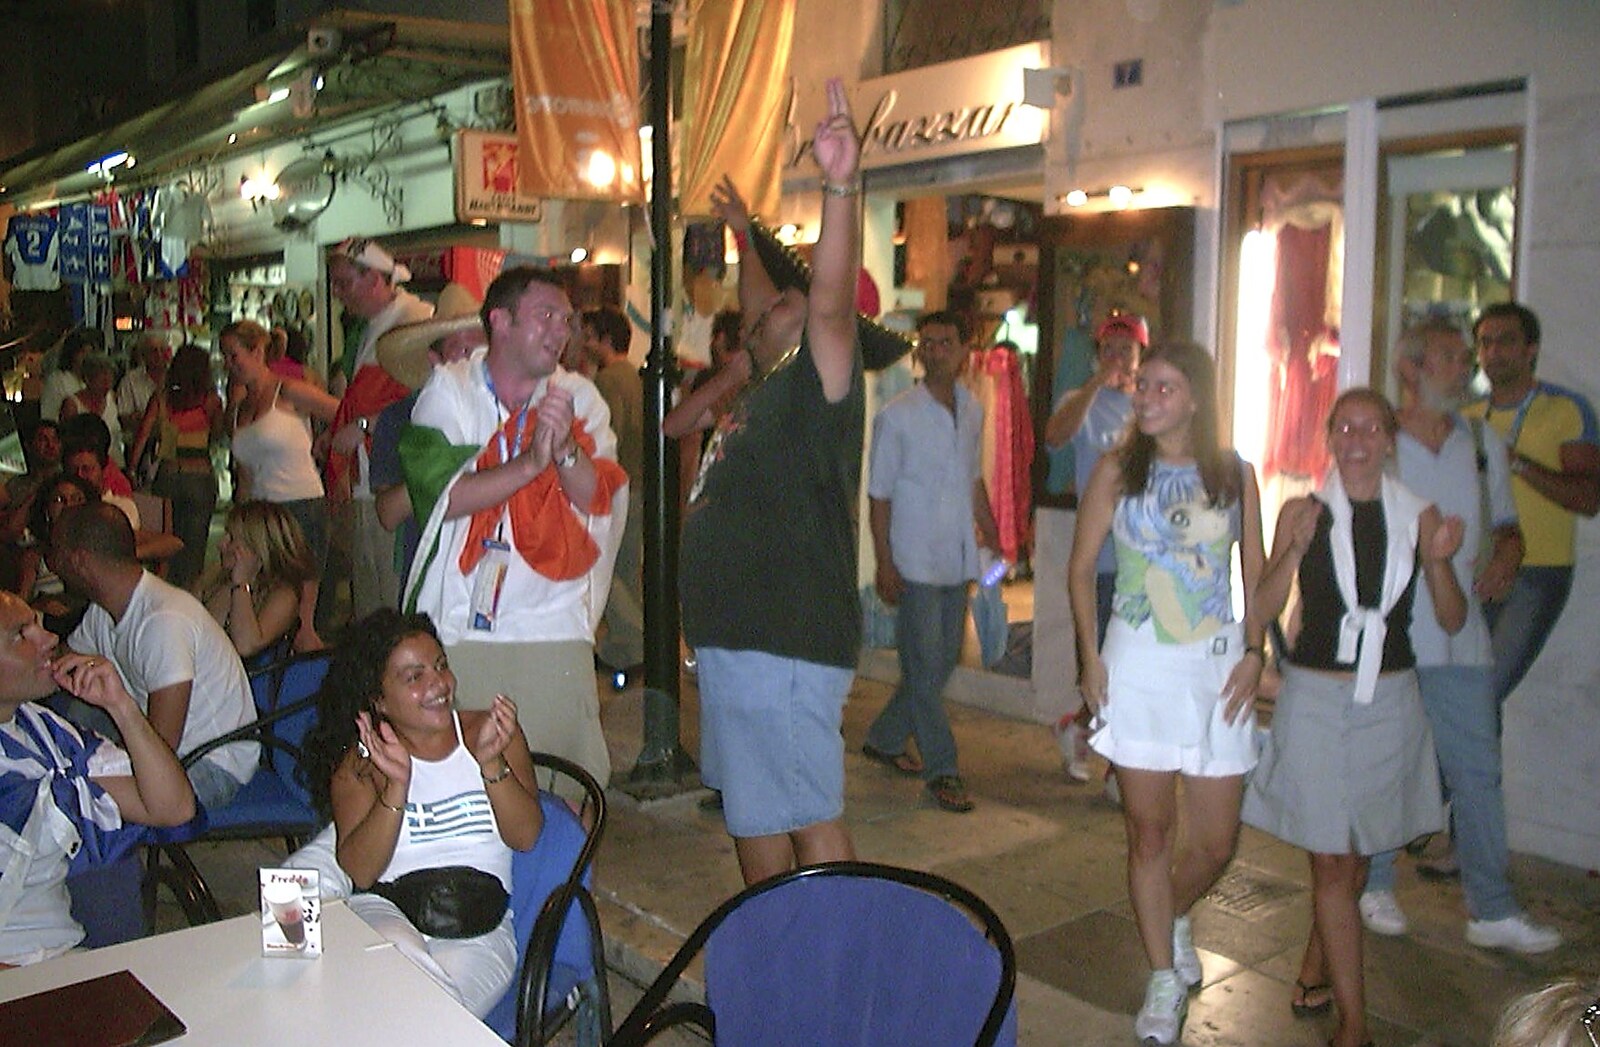 A Postcard From Athens: A Day Trip to the Olympics, Greece - 19th August 2004: There's all sorts of celebrations going on